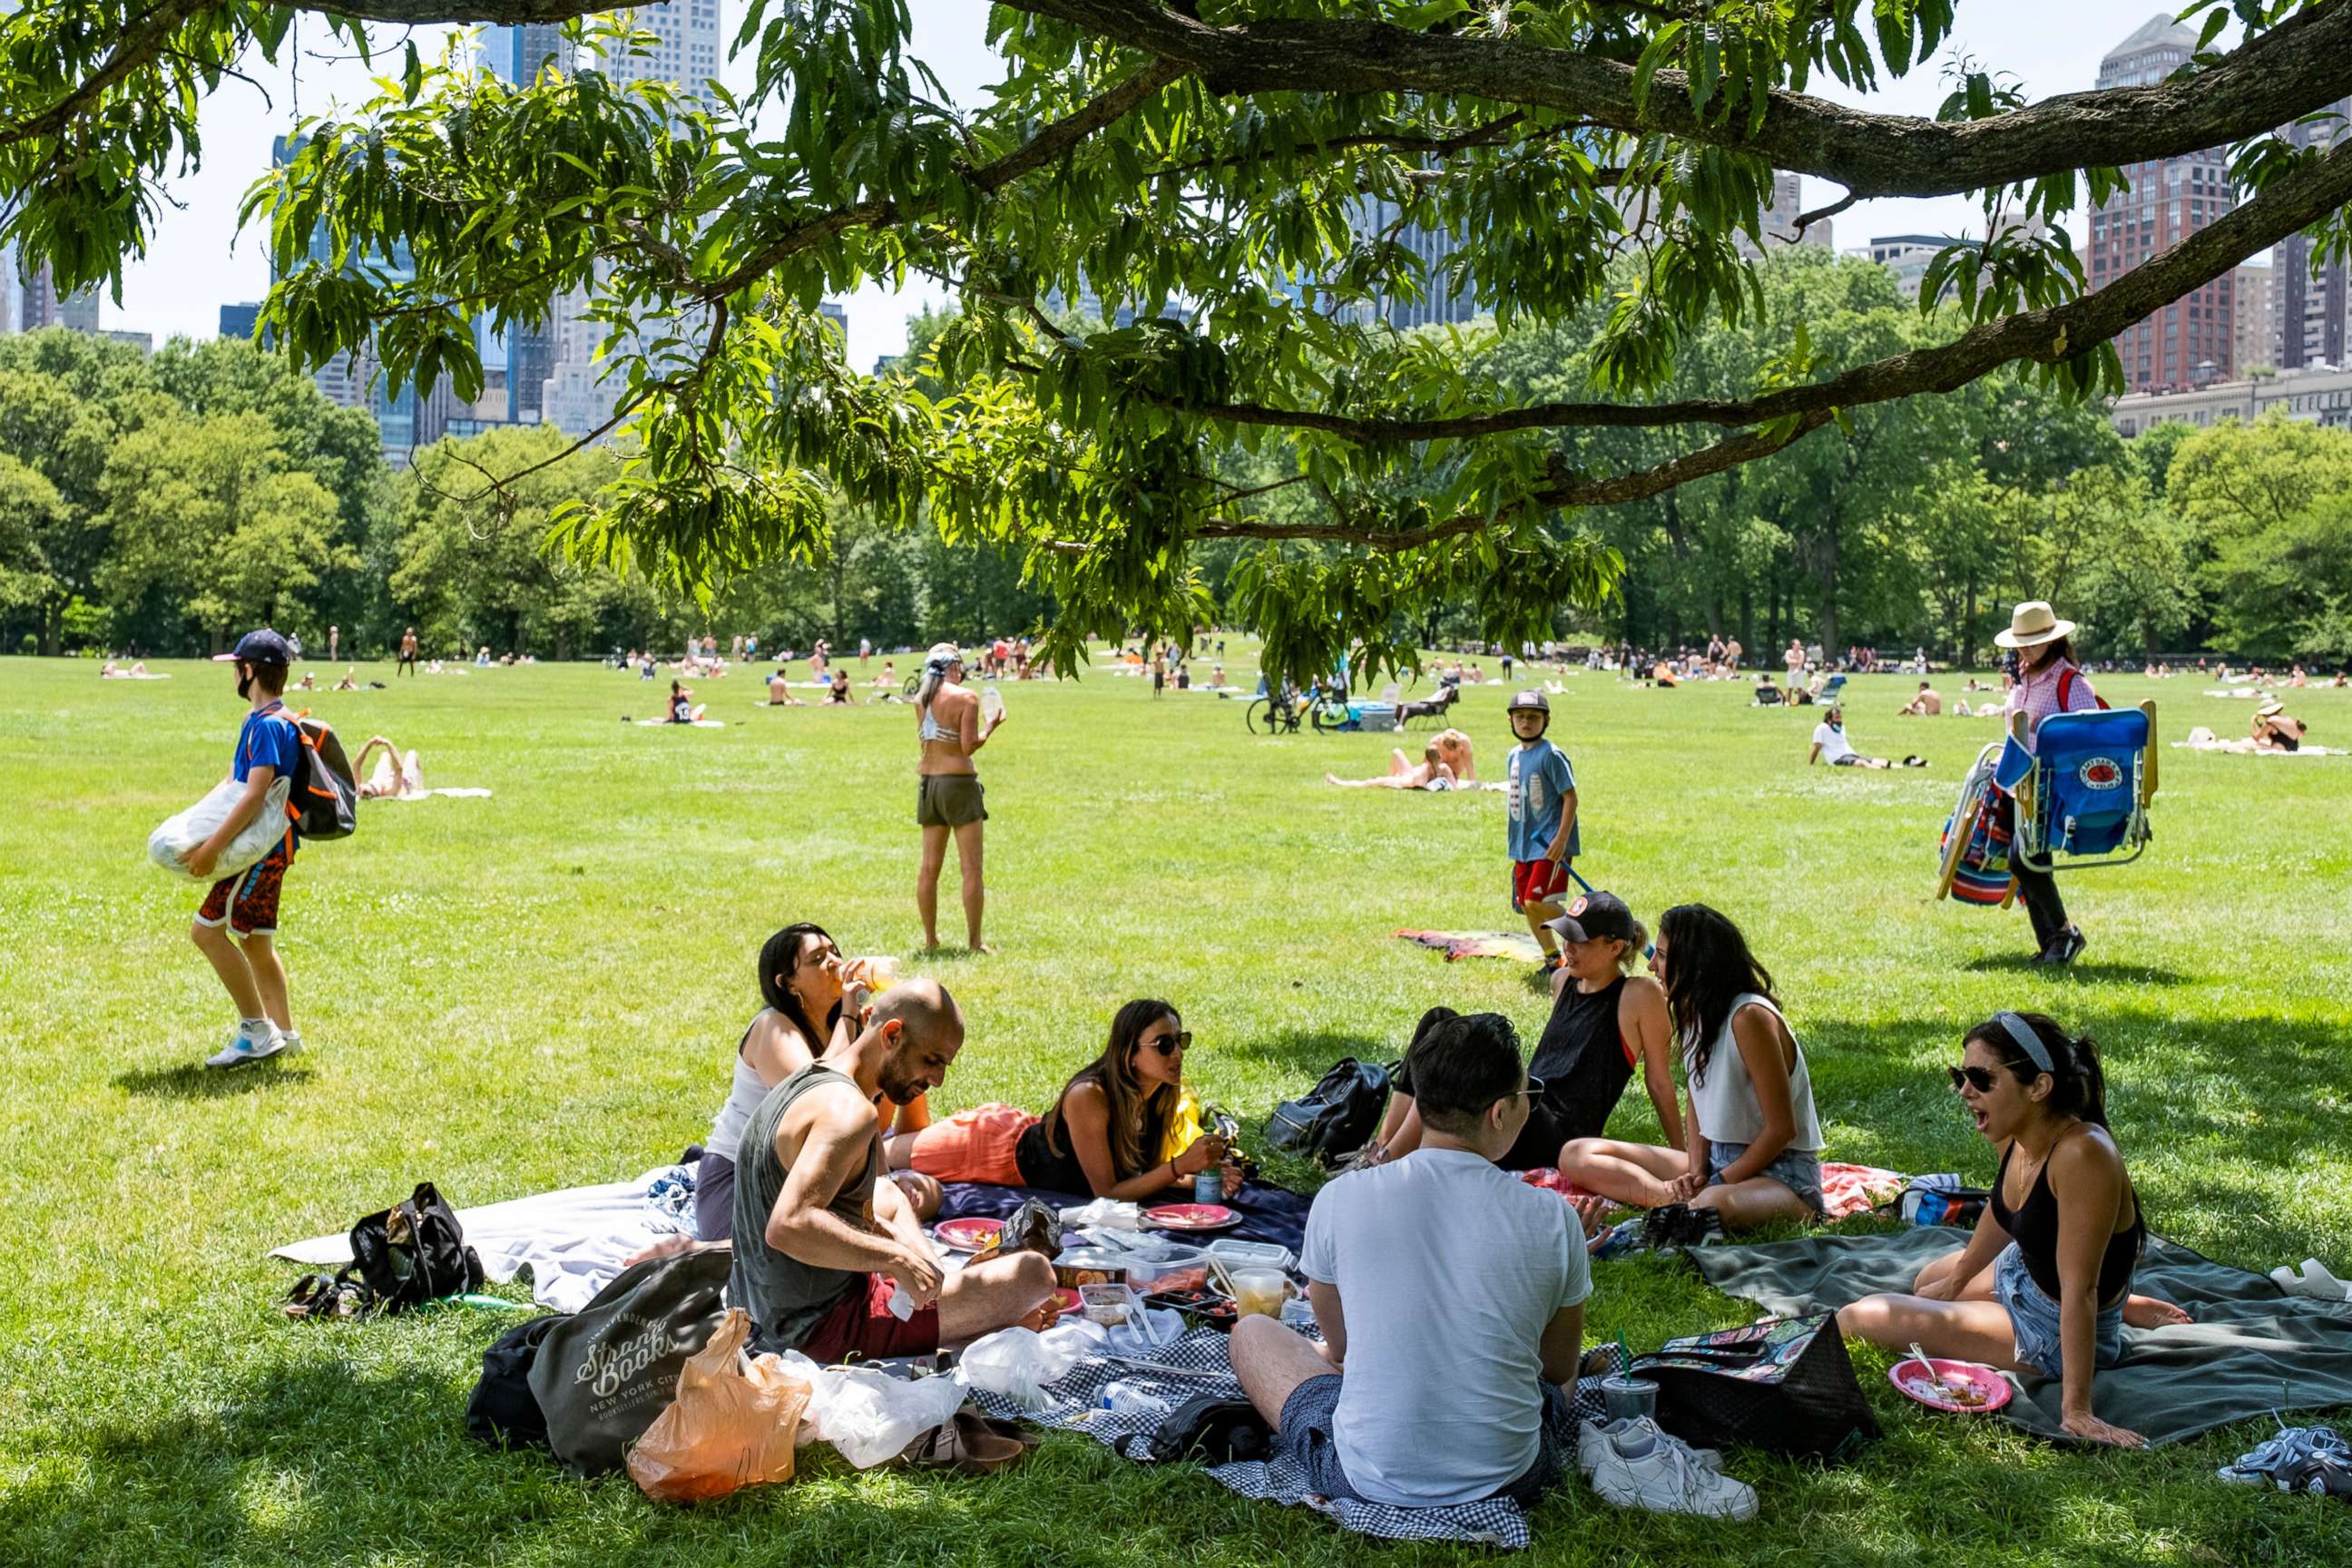 PHOTO: In this June 21, 2020, file photo, people enjoy the weather in Central Park in New York.